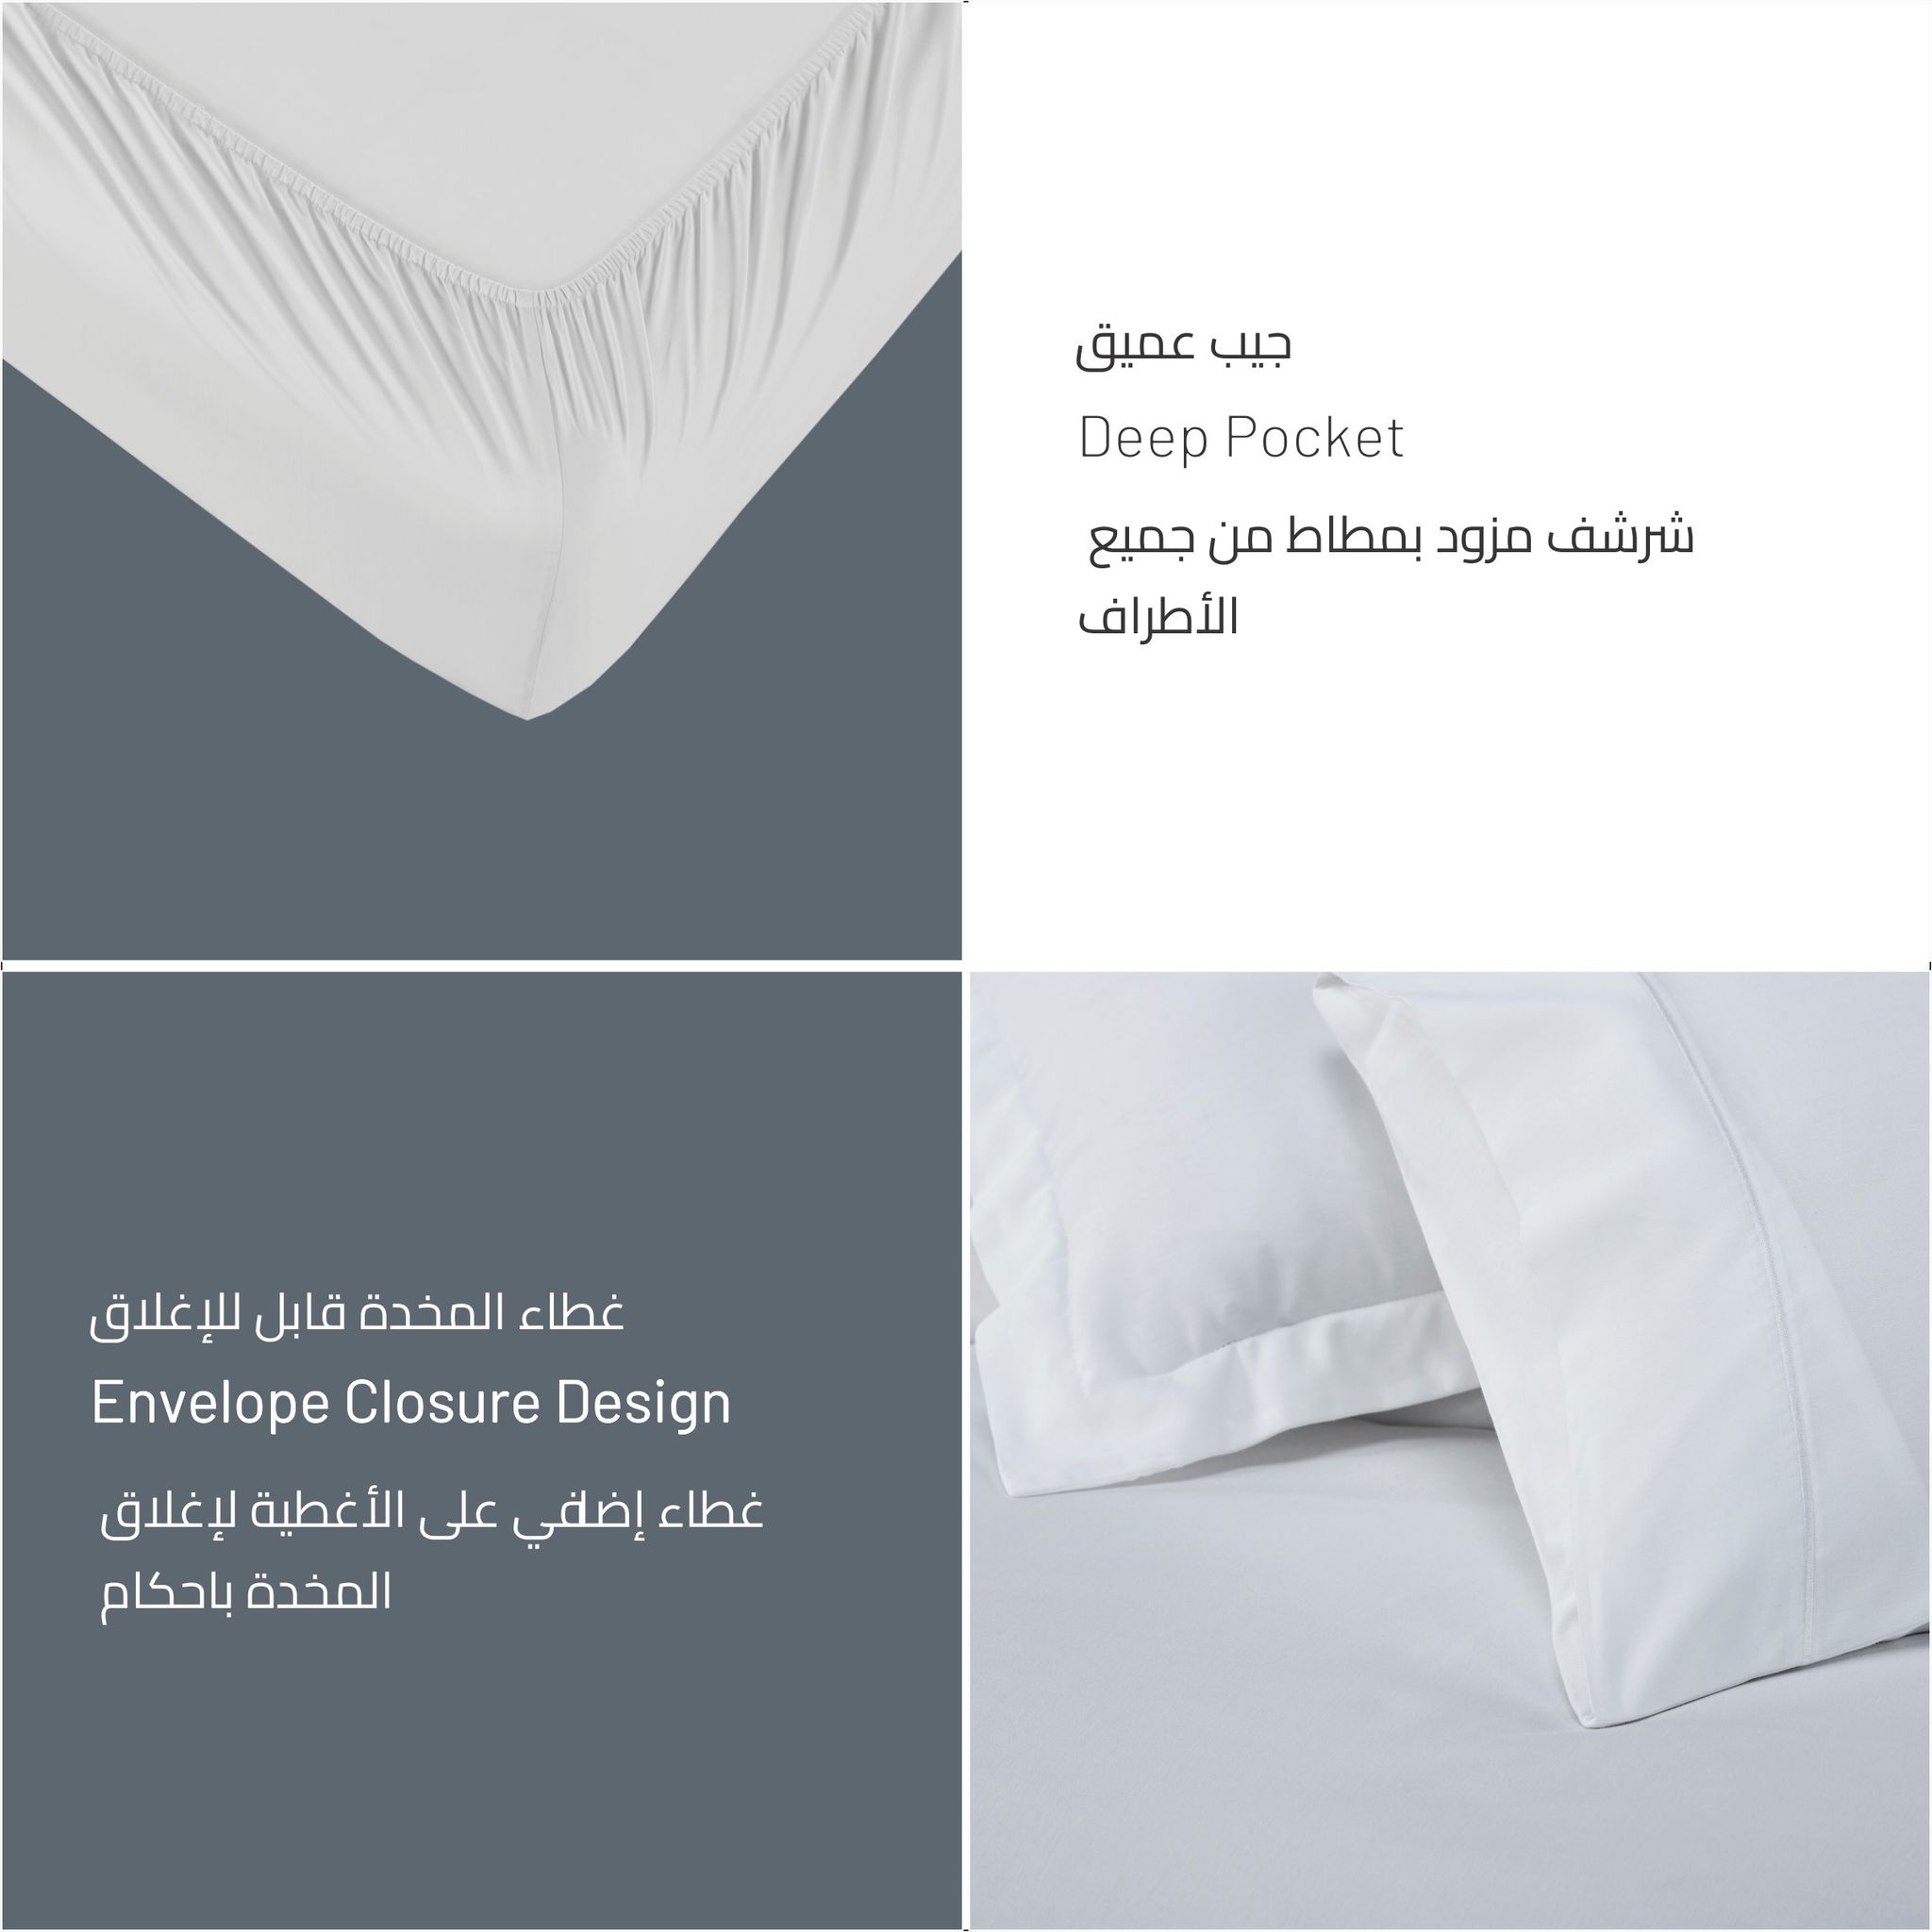 Fitted Sheet 3-Pcs Double Size Cotton Rich Bedding Sheet With Pillowcase Set,Soft and Silky 38cm Extra Deep Cooling Bed Sheet,White